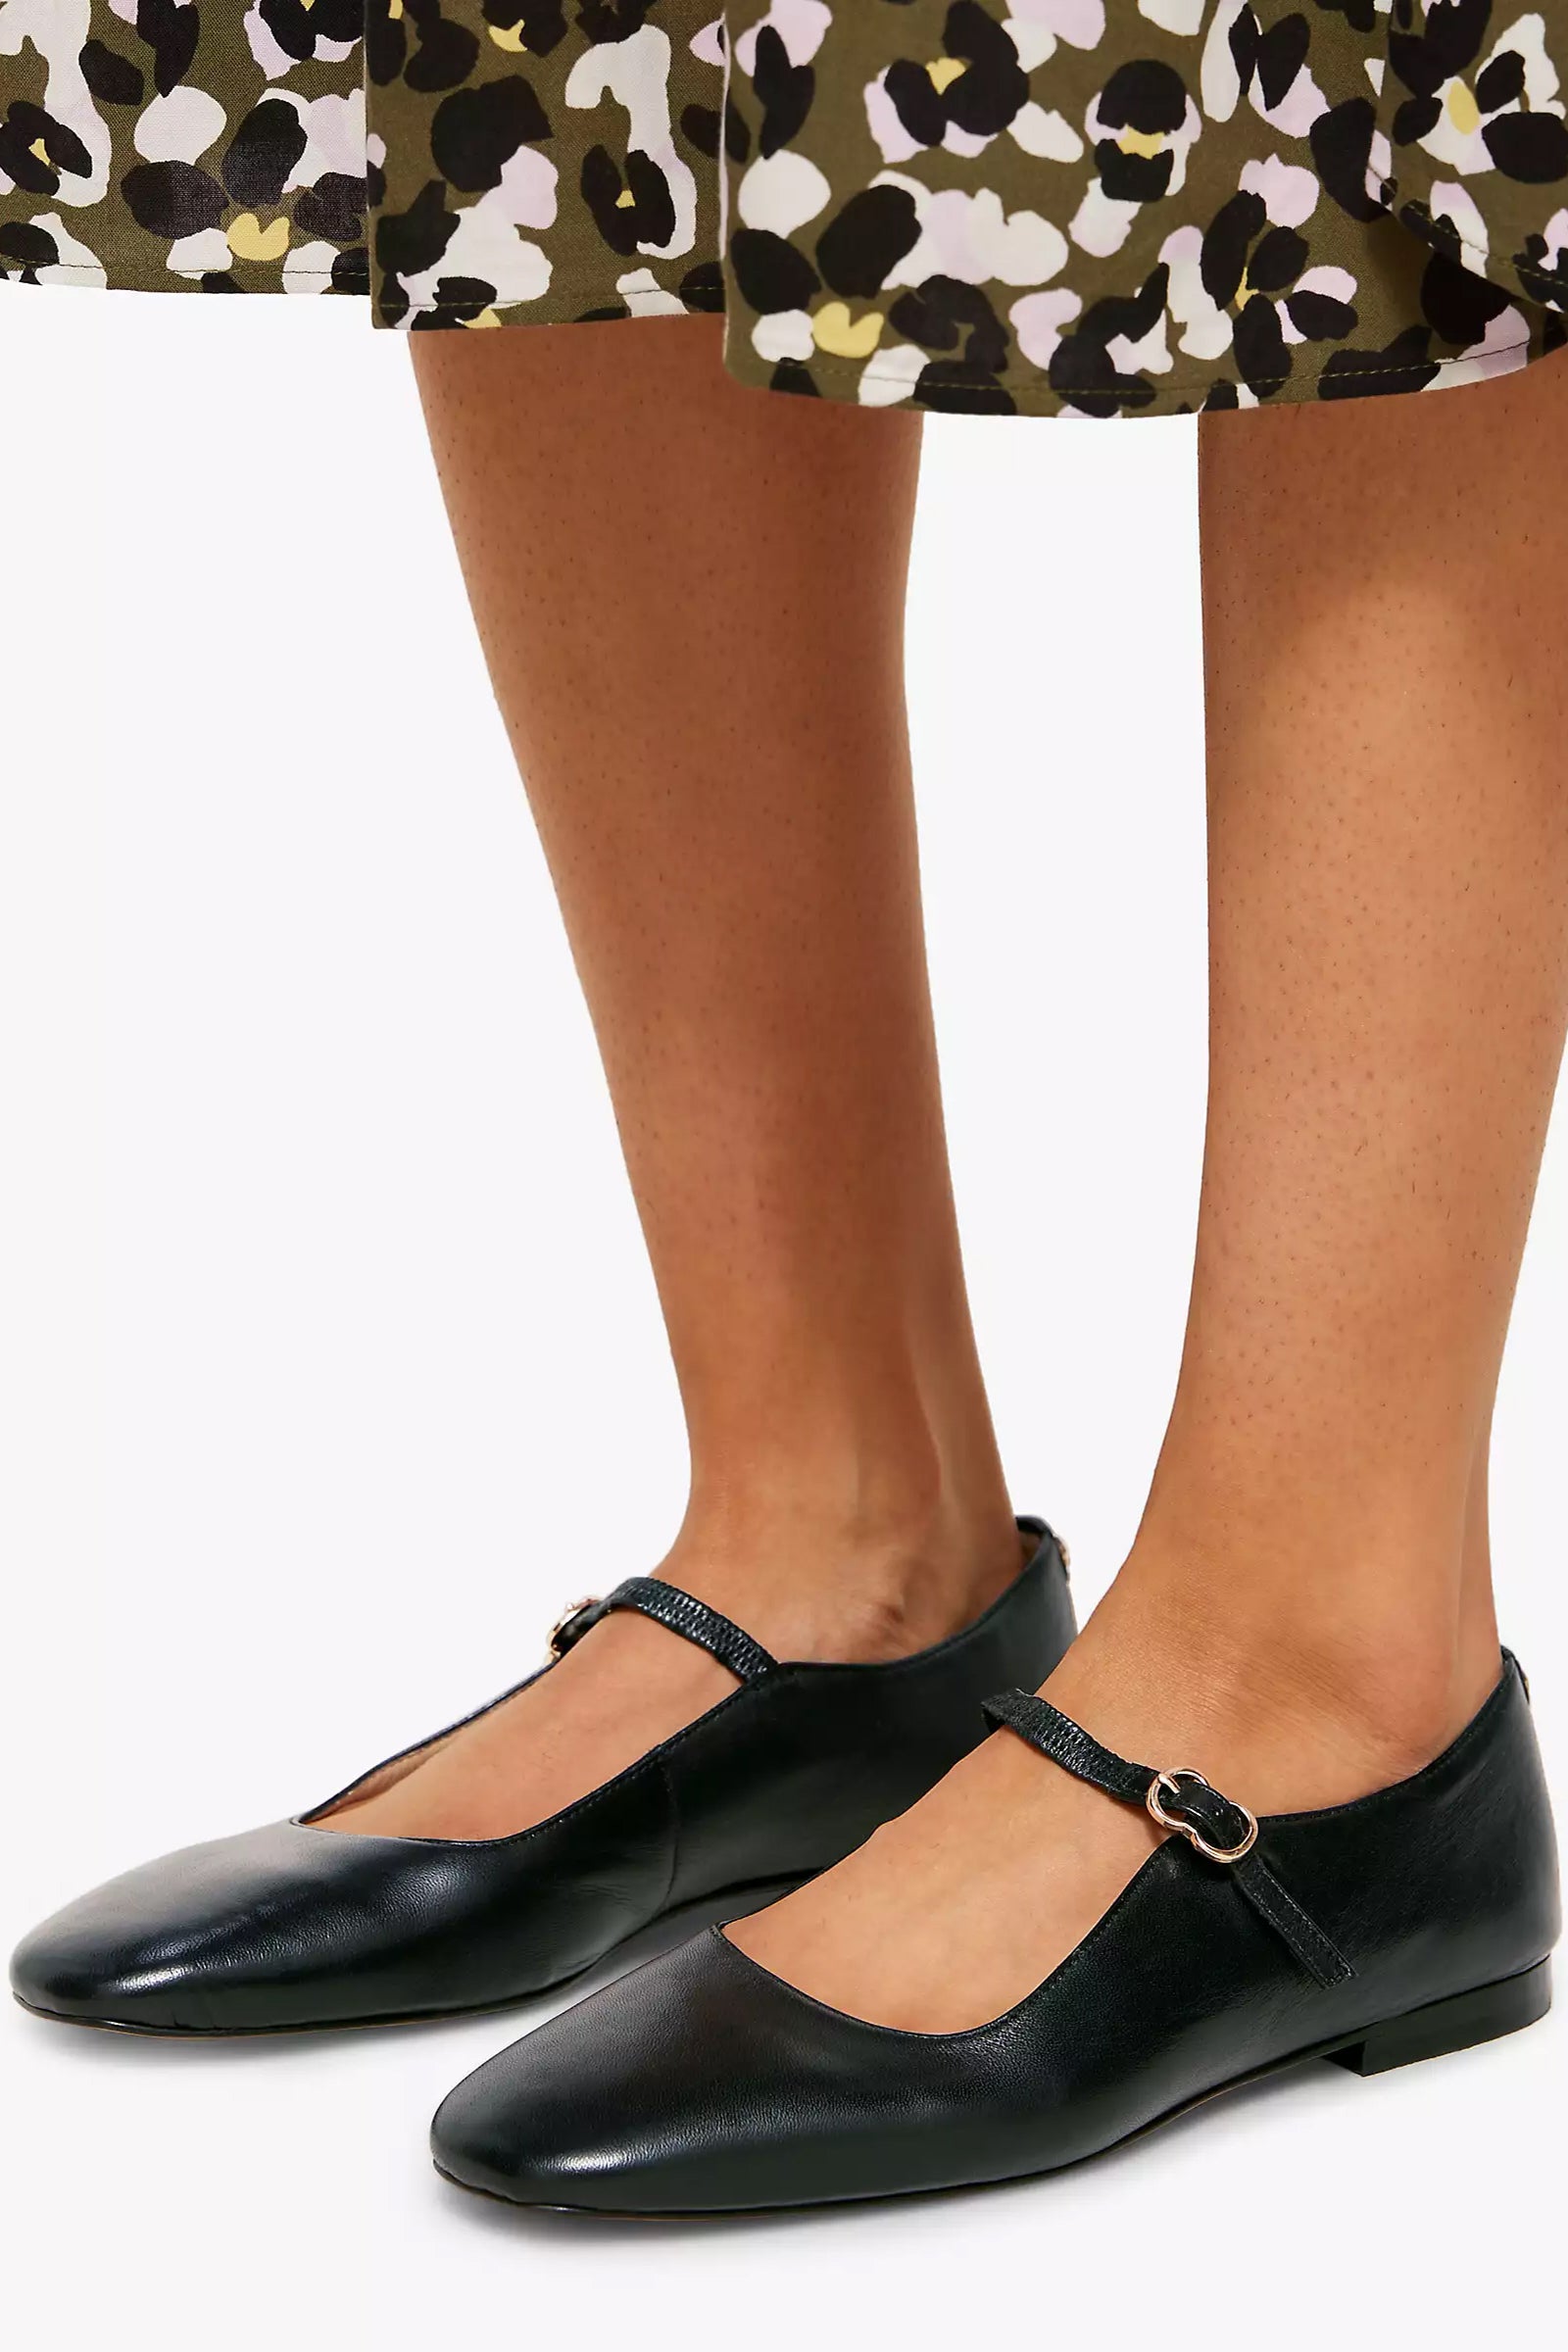 Our Top Tips On How To Wear Mary-Jane Flats